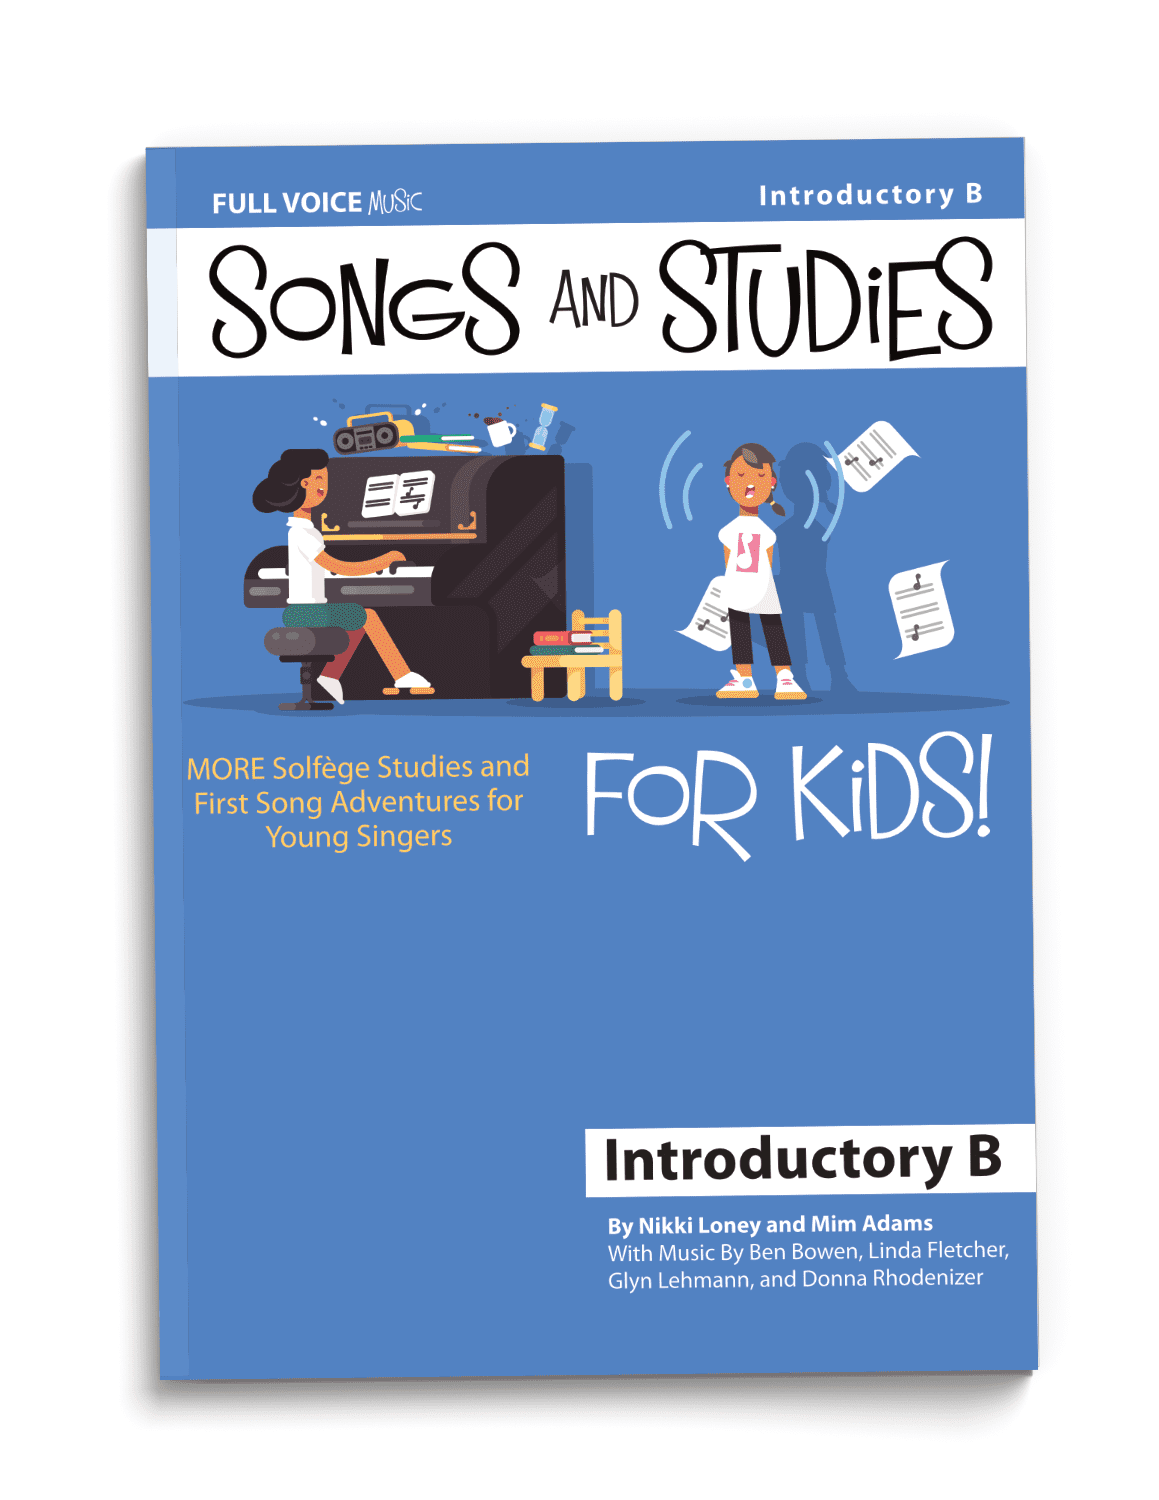 Songs and Studies for Kids! Introductory B